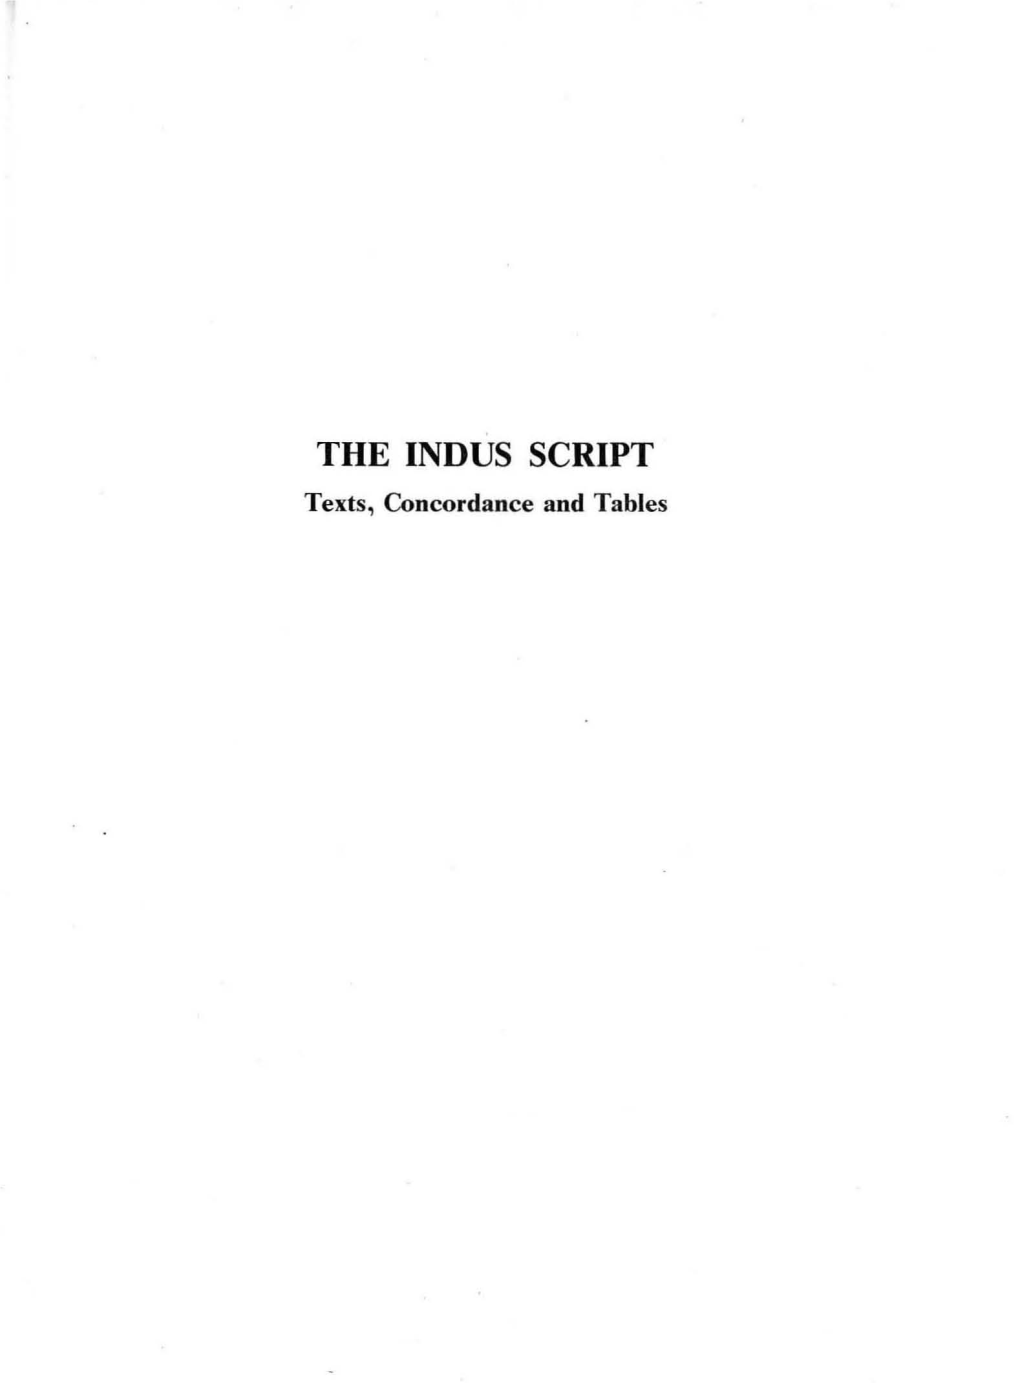 THE INDUS SCRIPT Texts, Concordance and Tables MEMOIRS of the ARCHAEOLOGICAL SURVEY of Inbia No